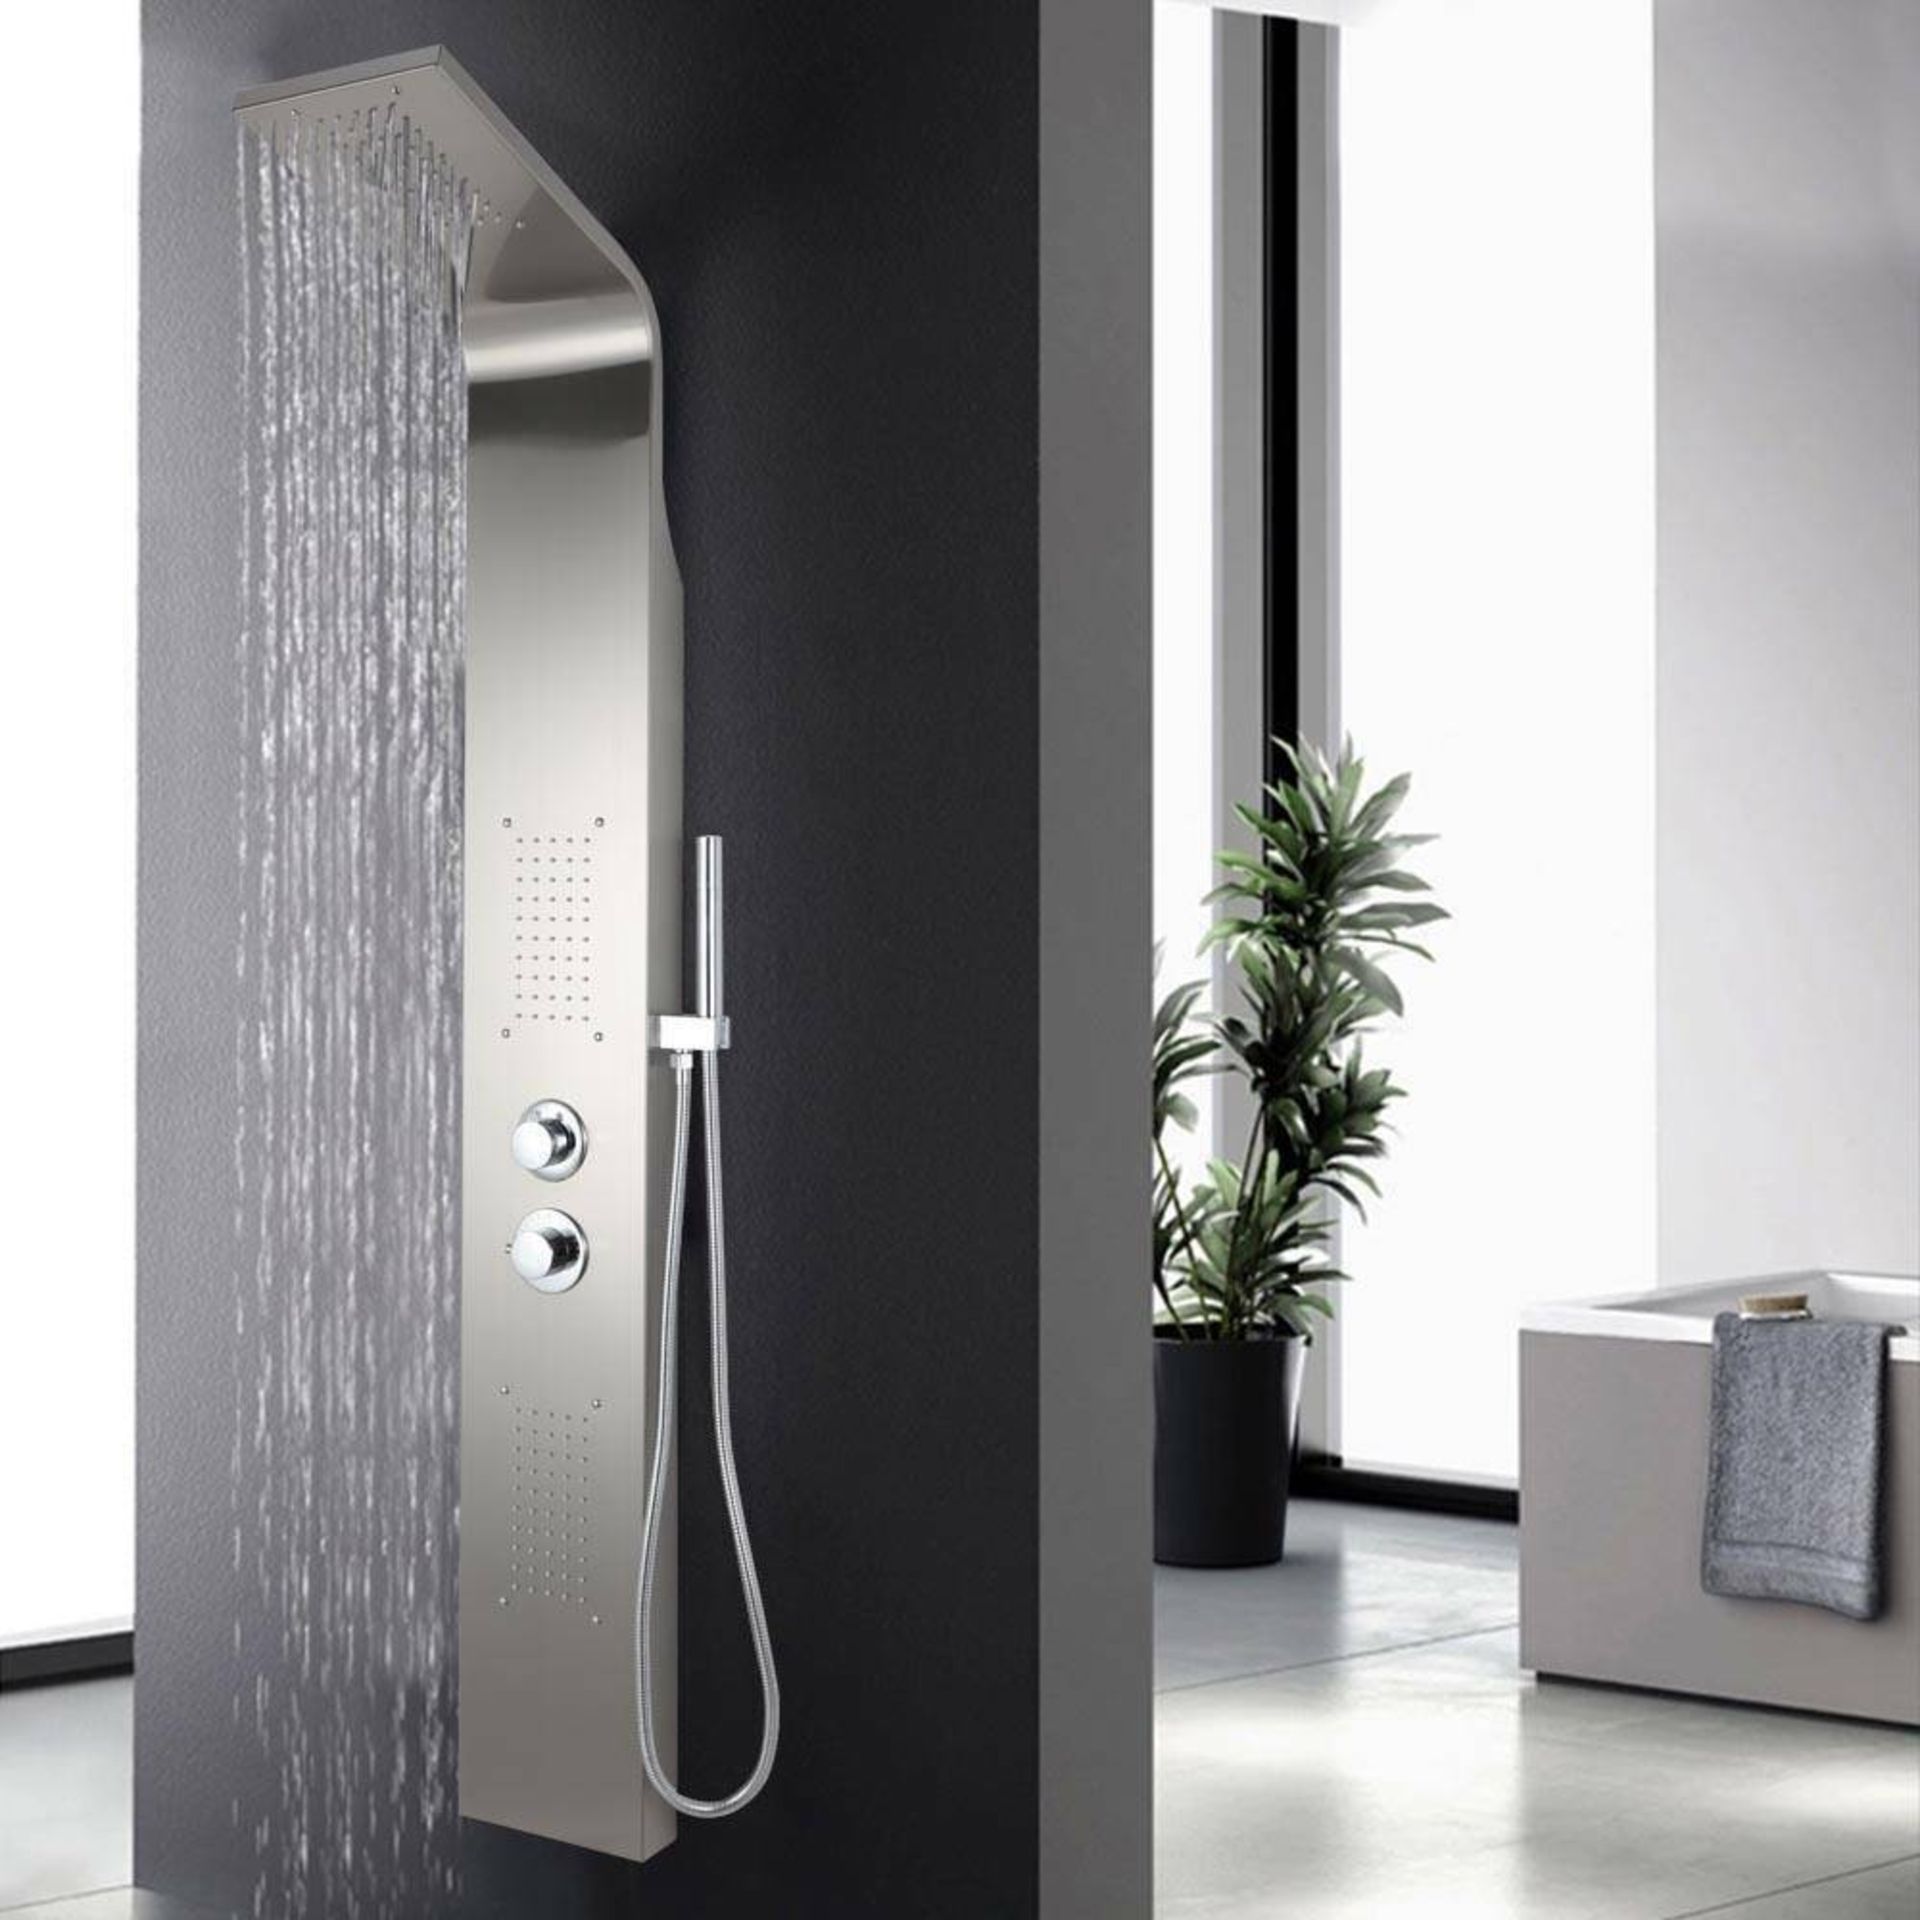 (DF34) NEW & BOXED Shower Panel Column Tower w/ Body Jets + Waterfall Bathroom Shower. The a...